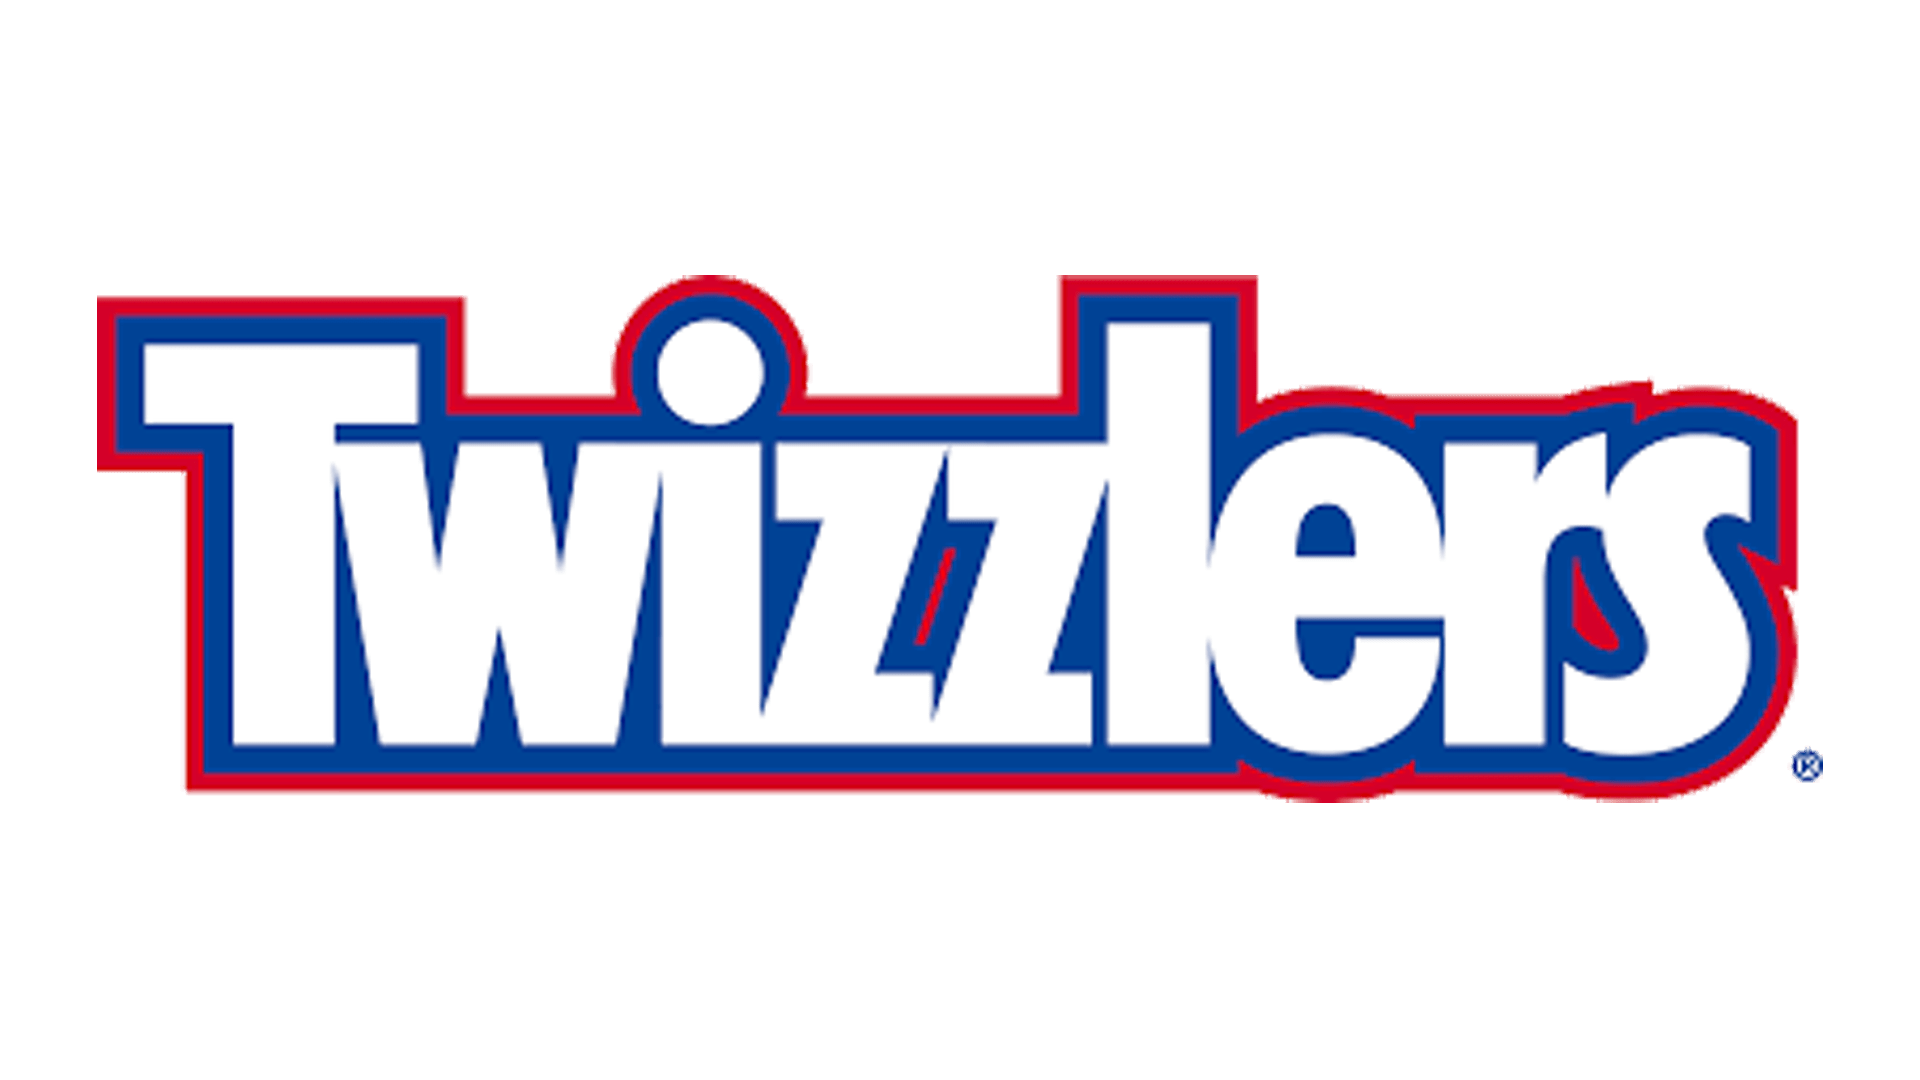 Marque: TWIZZLERS